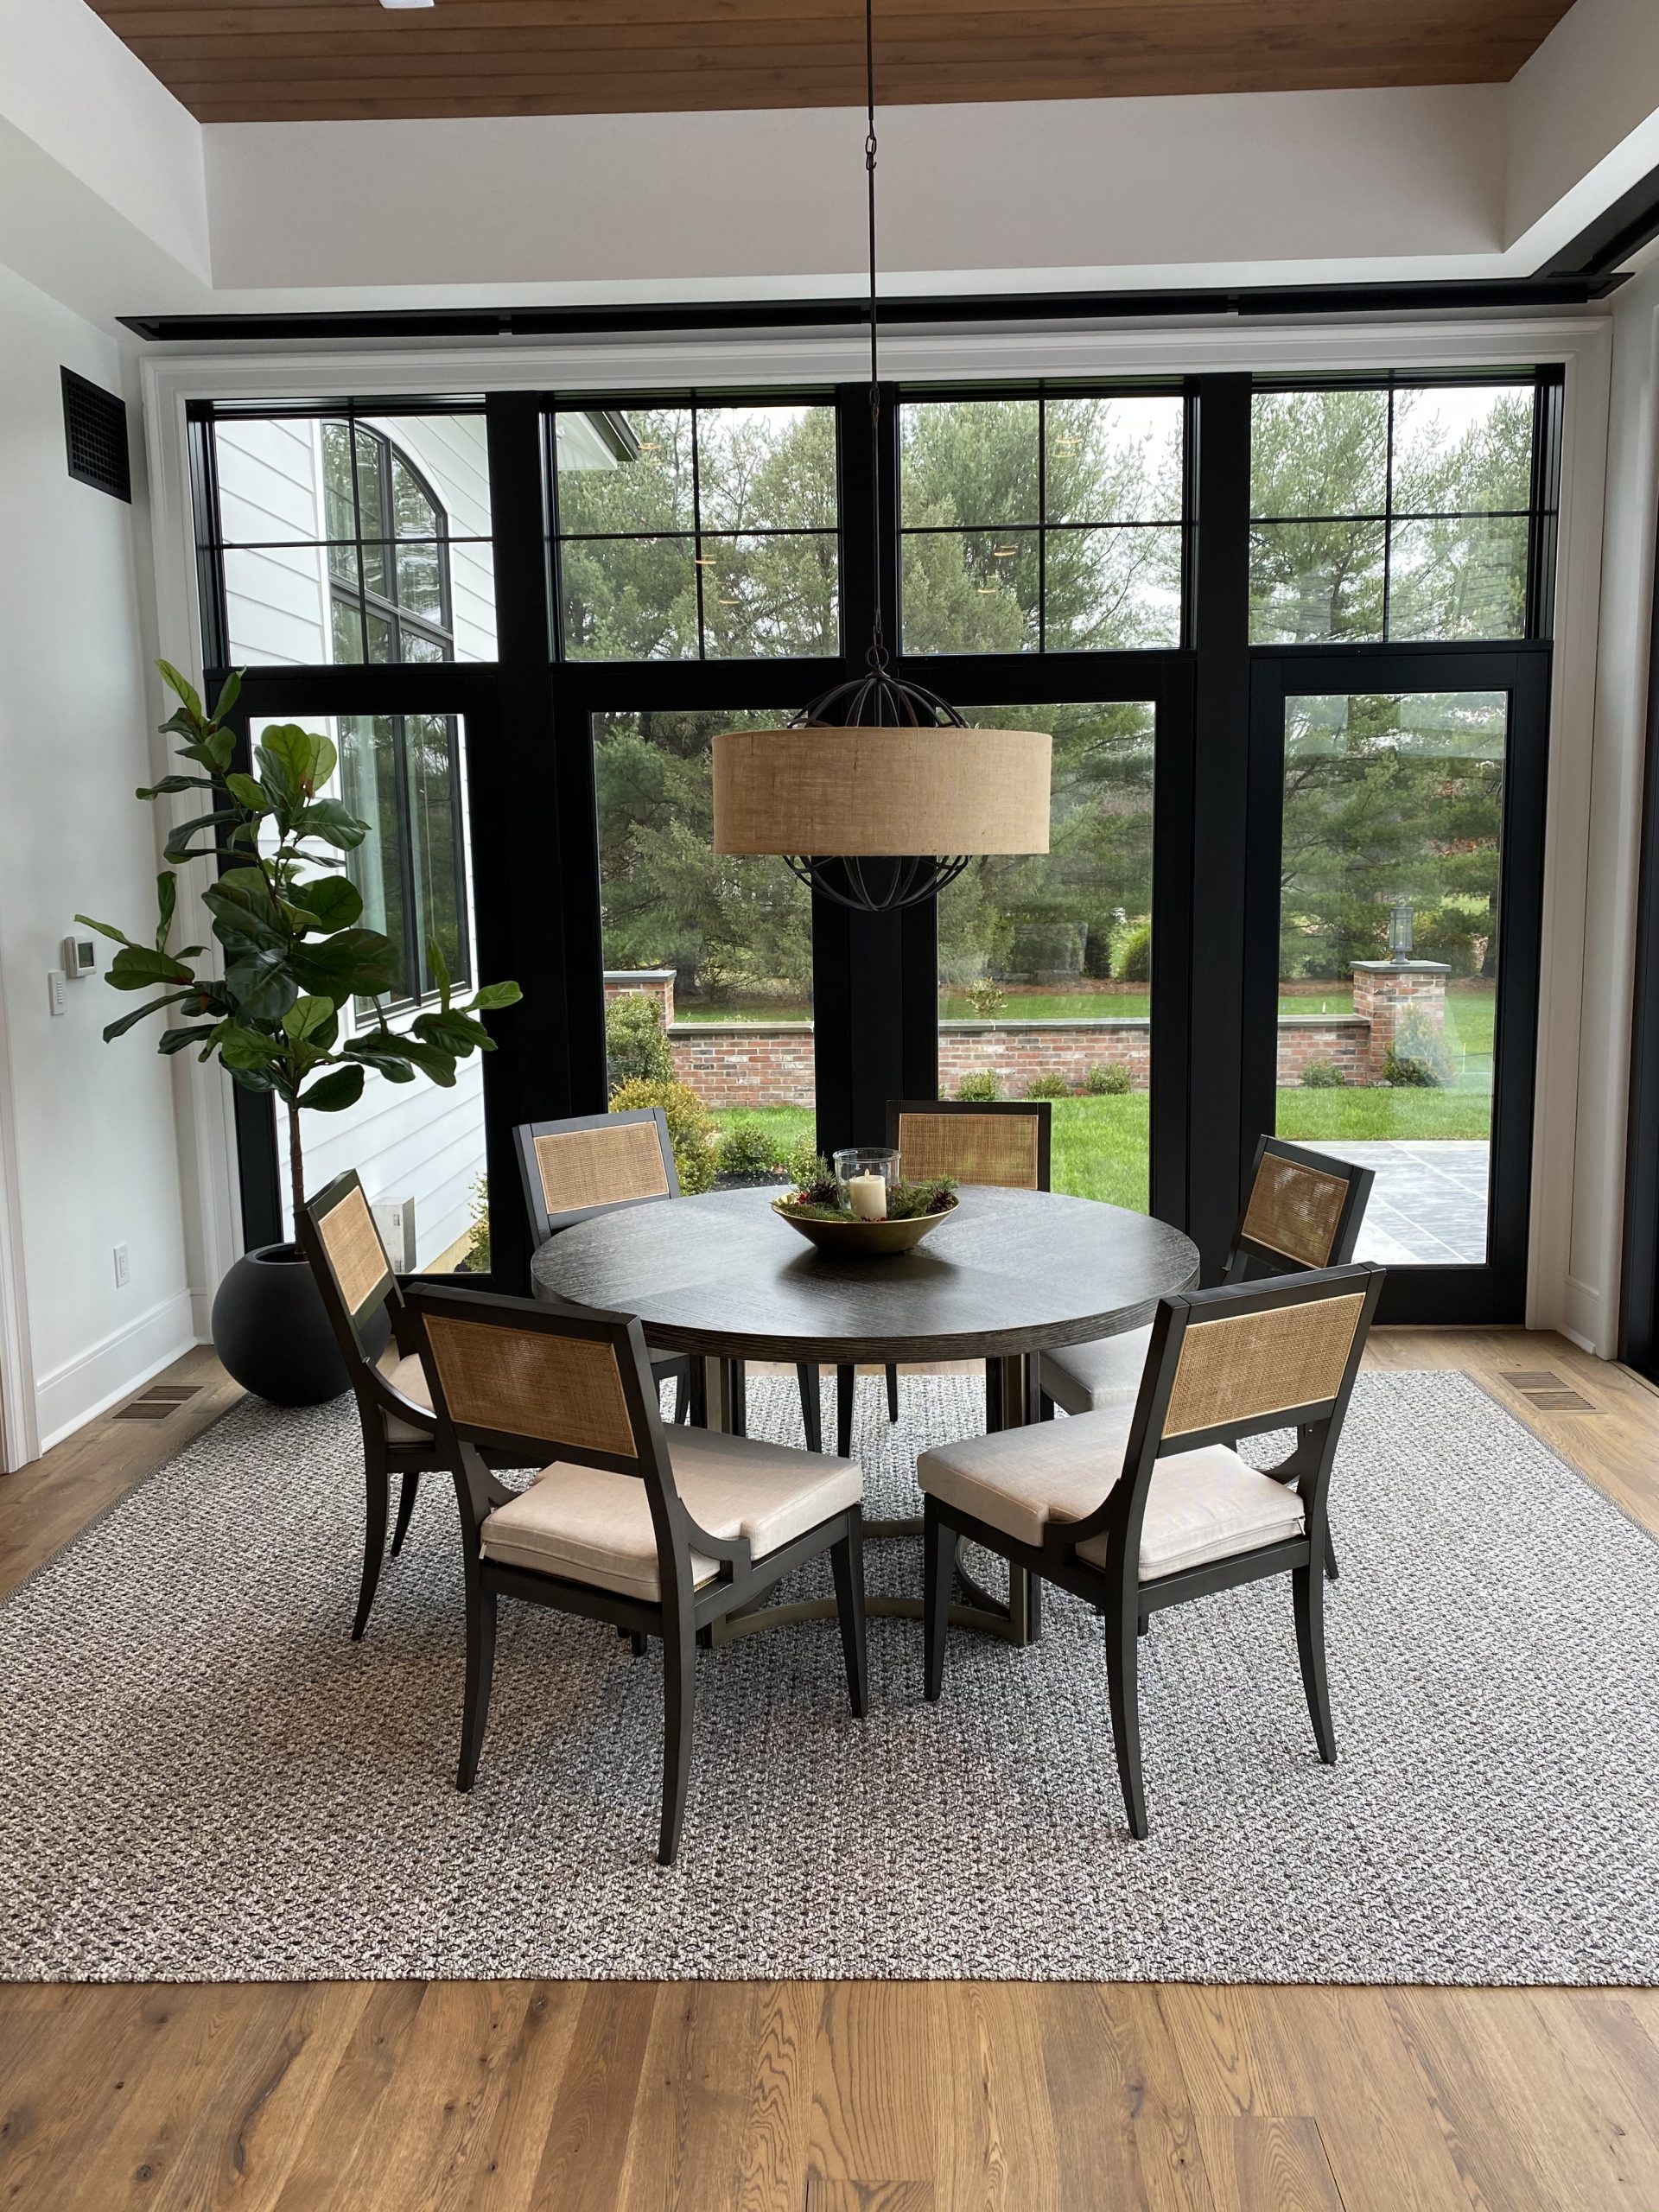 Saucon House Dining Area designed by GailGray Home in Lehigh Valley, PA